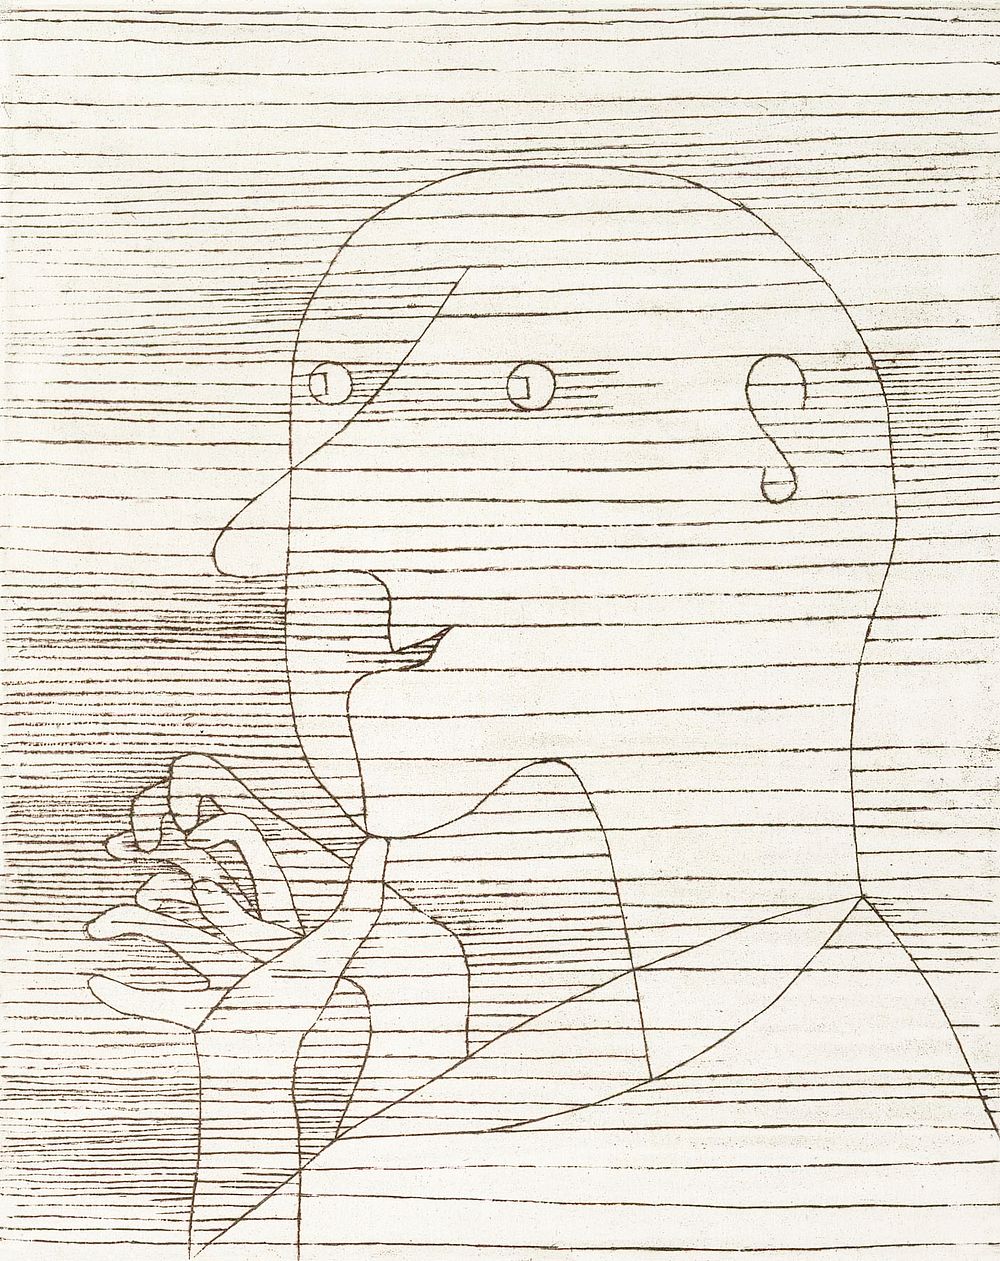 Old Man Counting on his Fingers (1929) by Paul Klee. Original from Finnish National Gallery. Digitally enhanced by rawpixel.